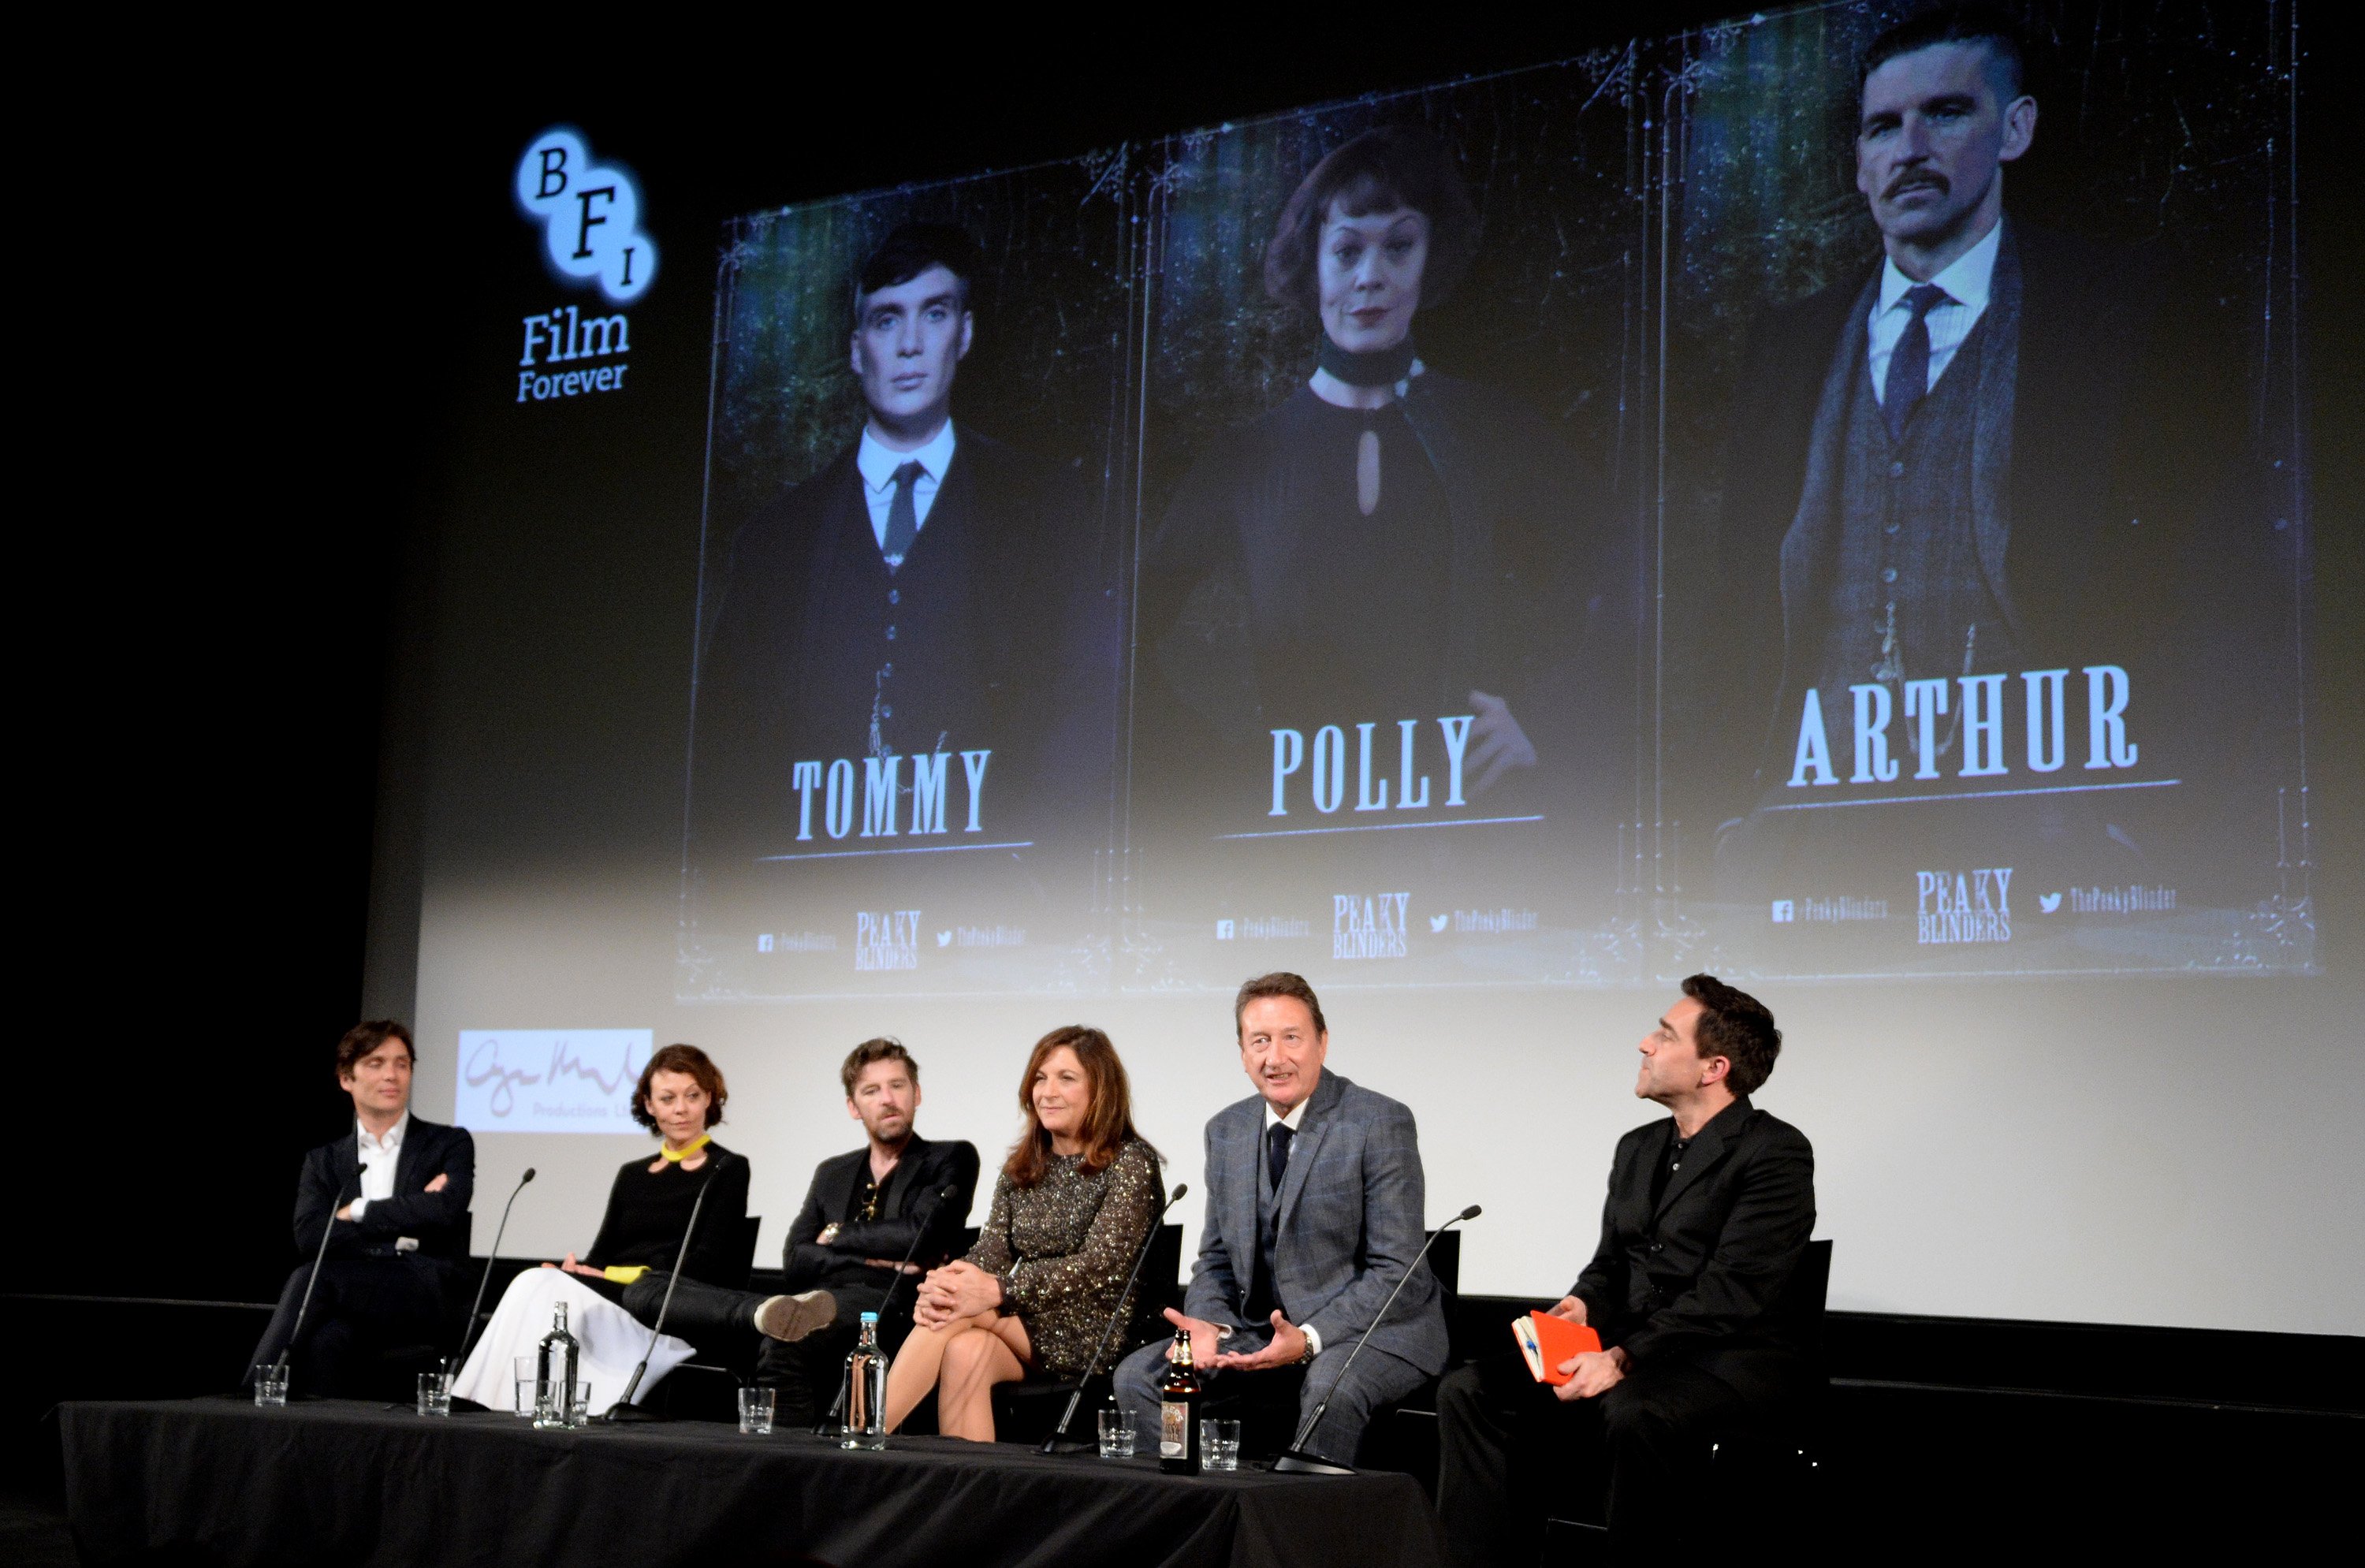 Cillian Murphy, Helen McCrory, Paul Anderson, Caryn Mandabach and Steven Knight sit for a Q&A a the premiere of 'Peaky Blinders' season 3